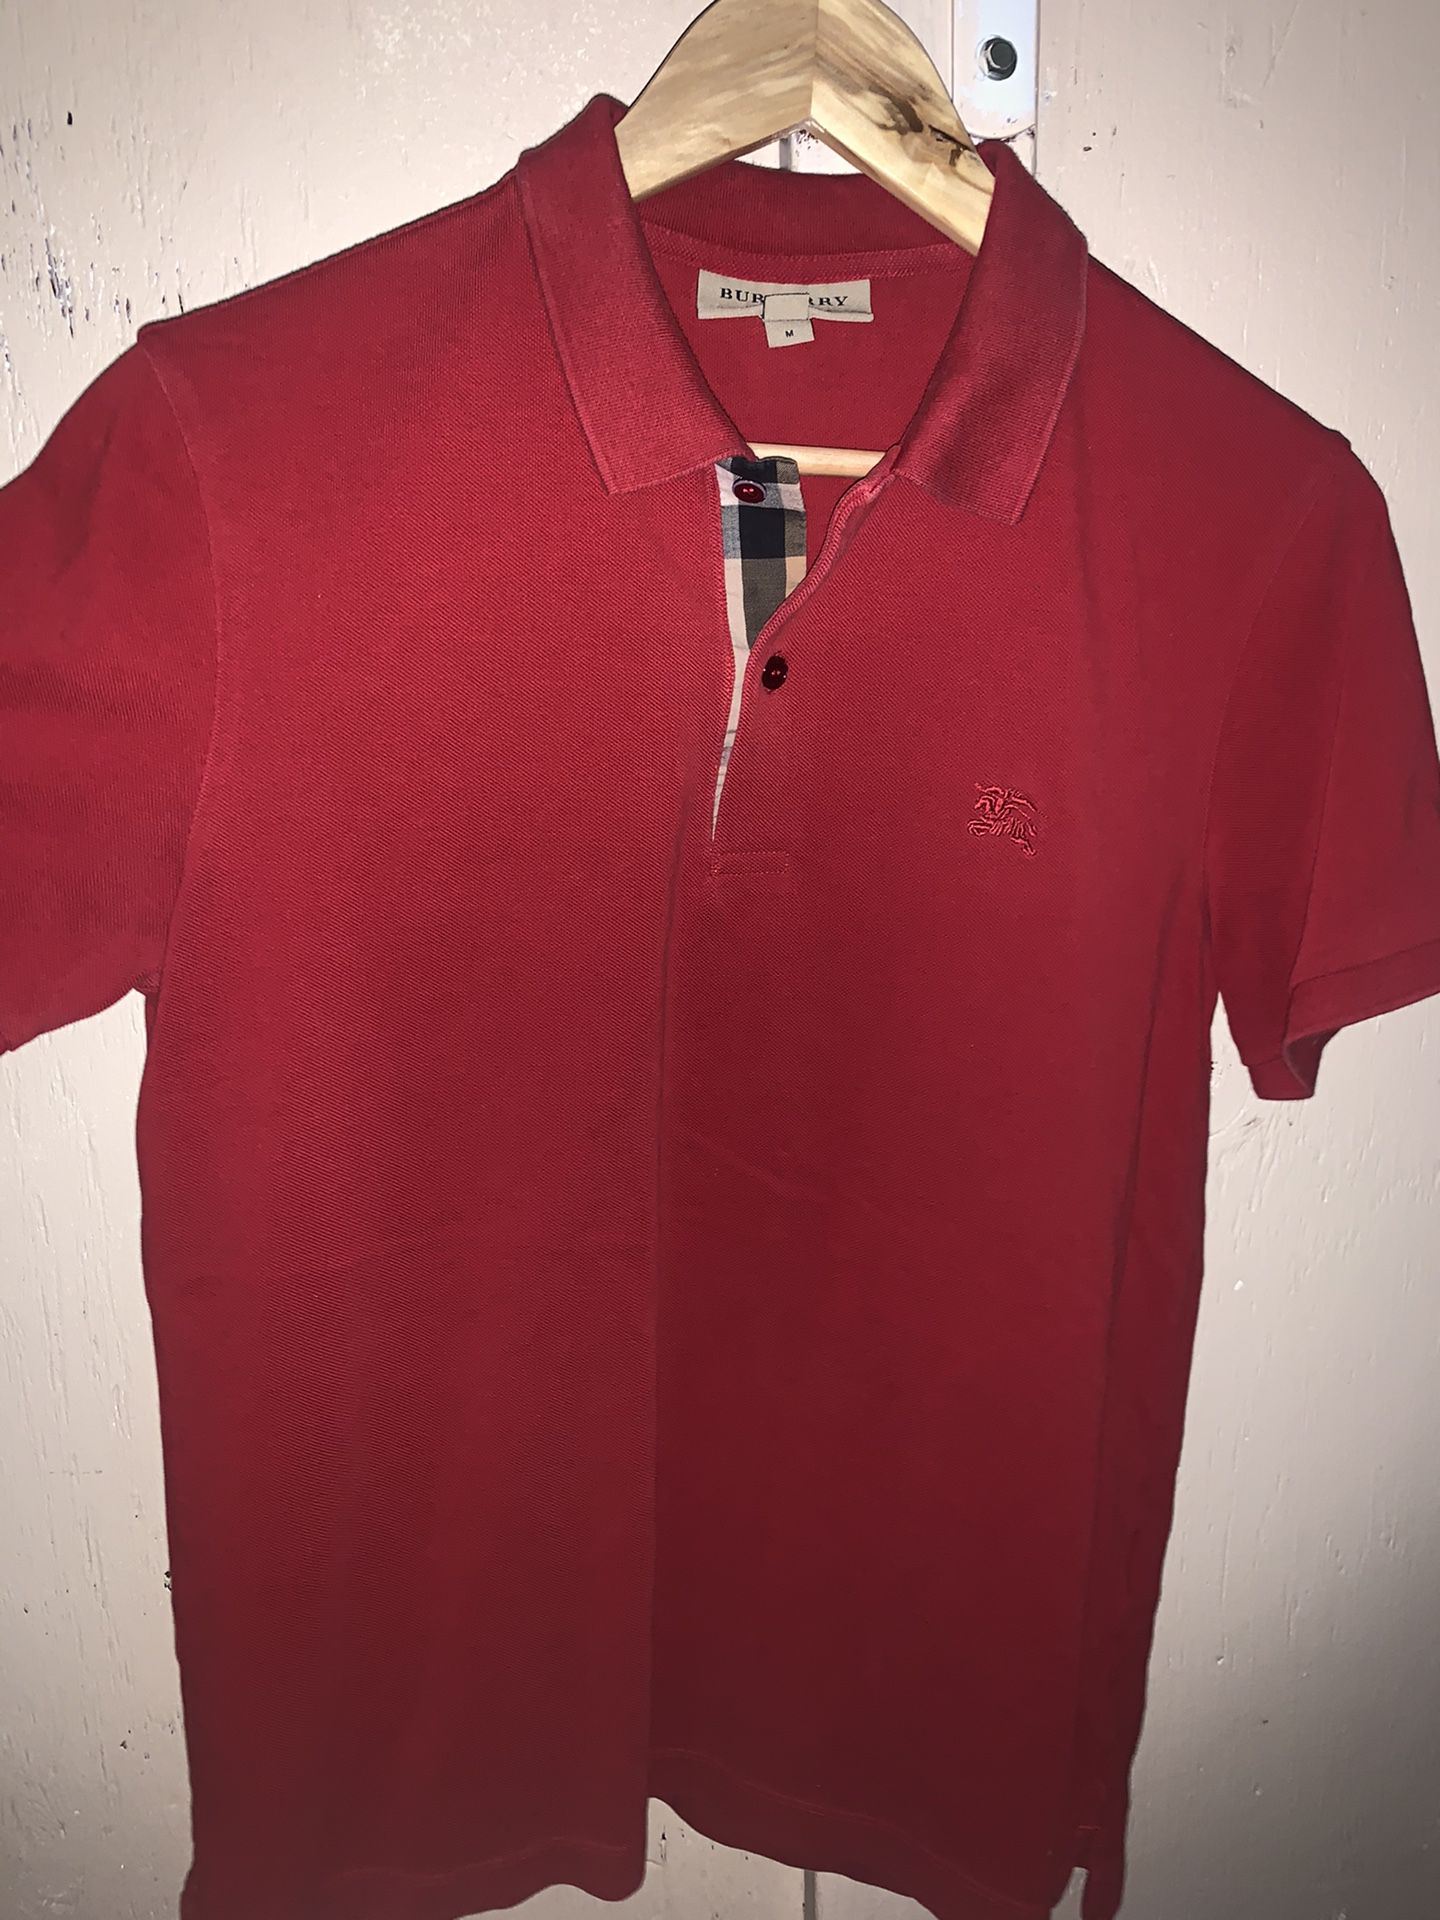 Burberry Collared tshirt Size M